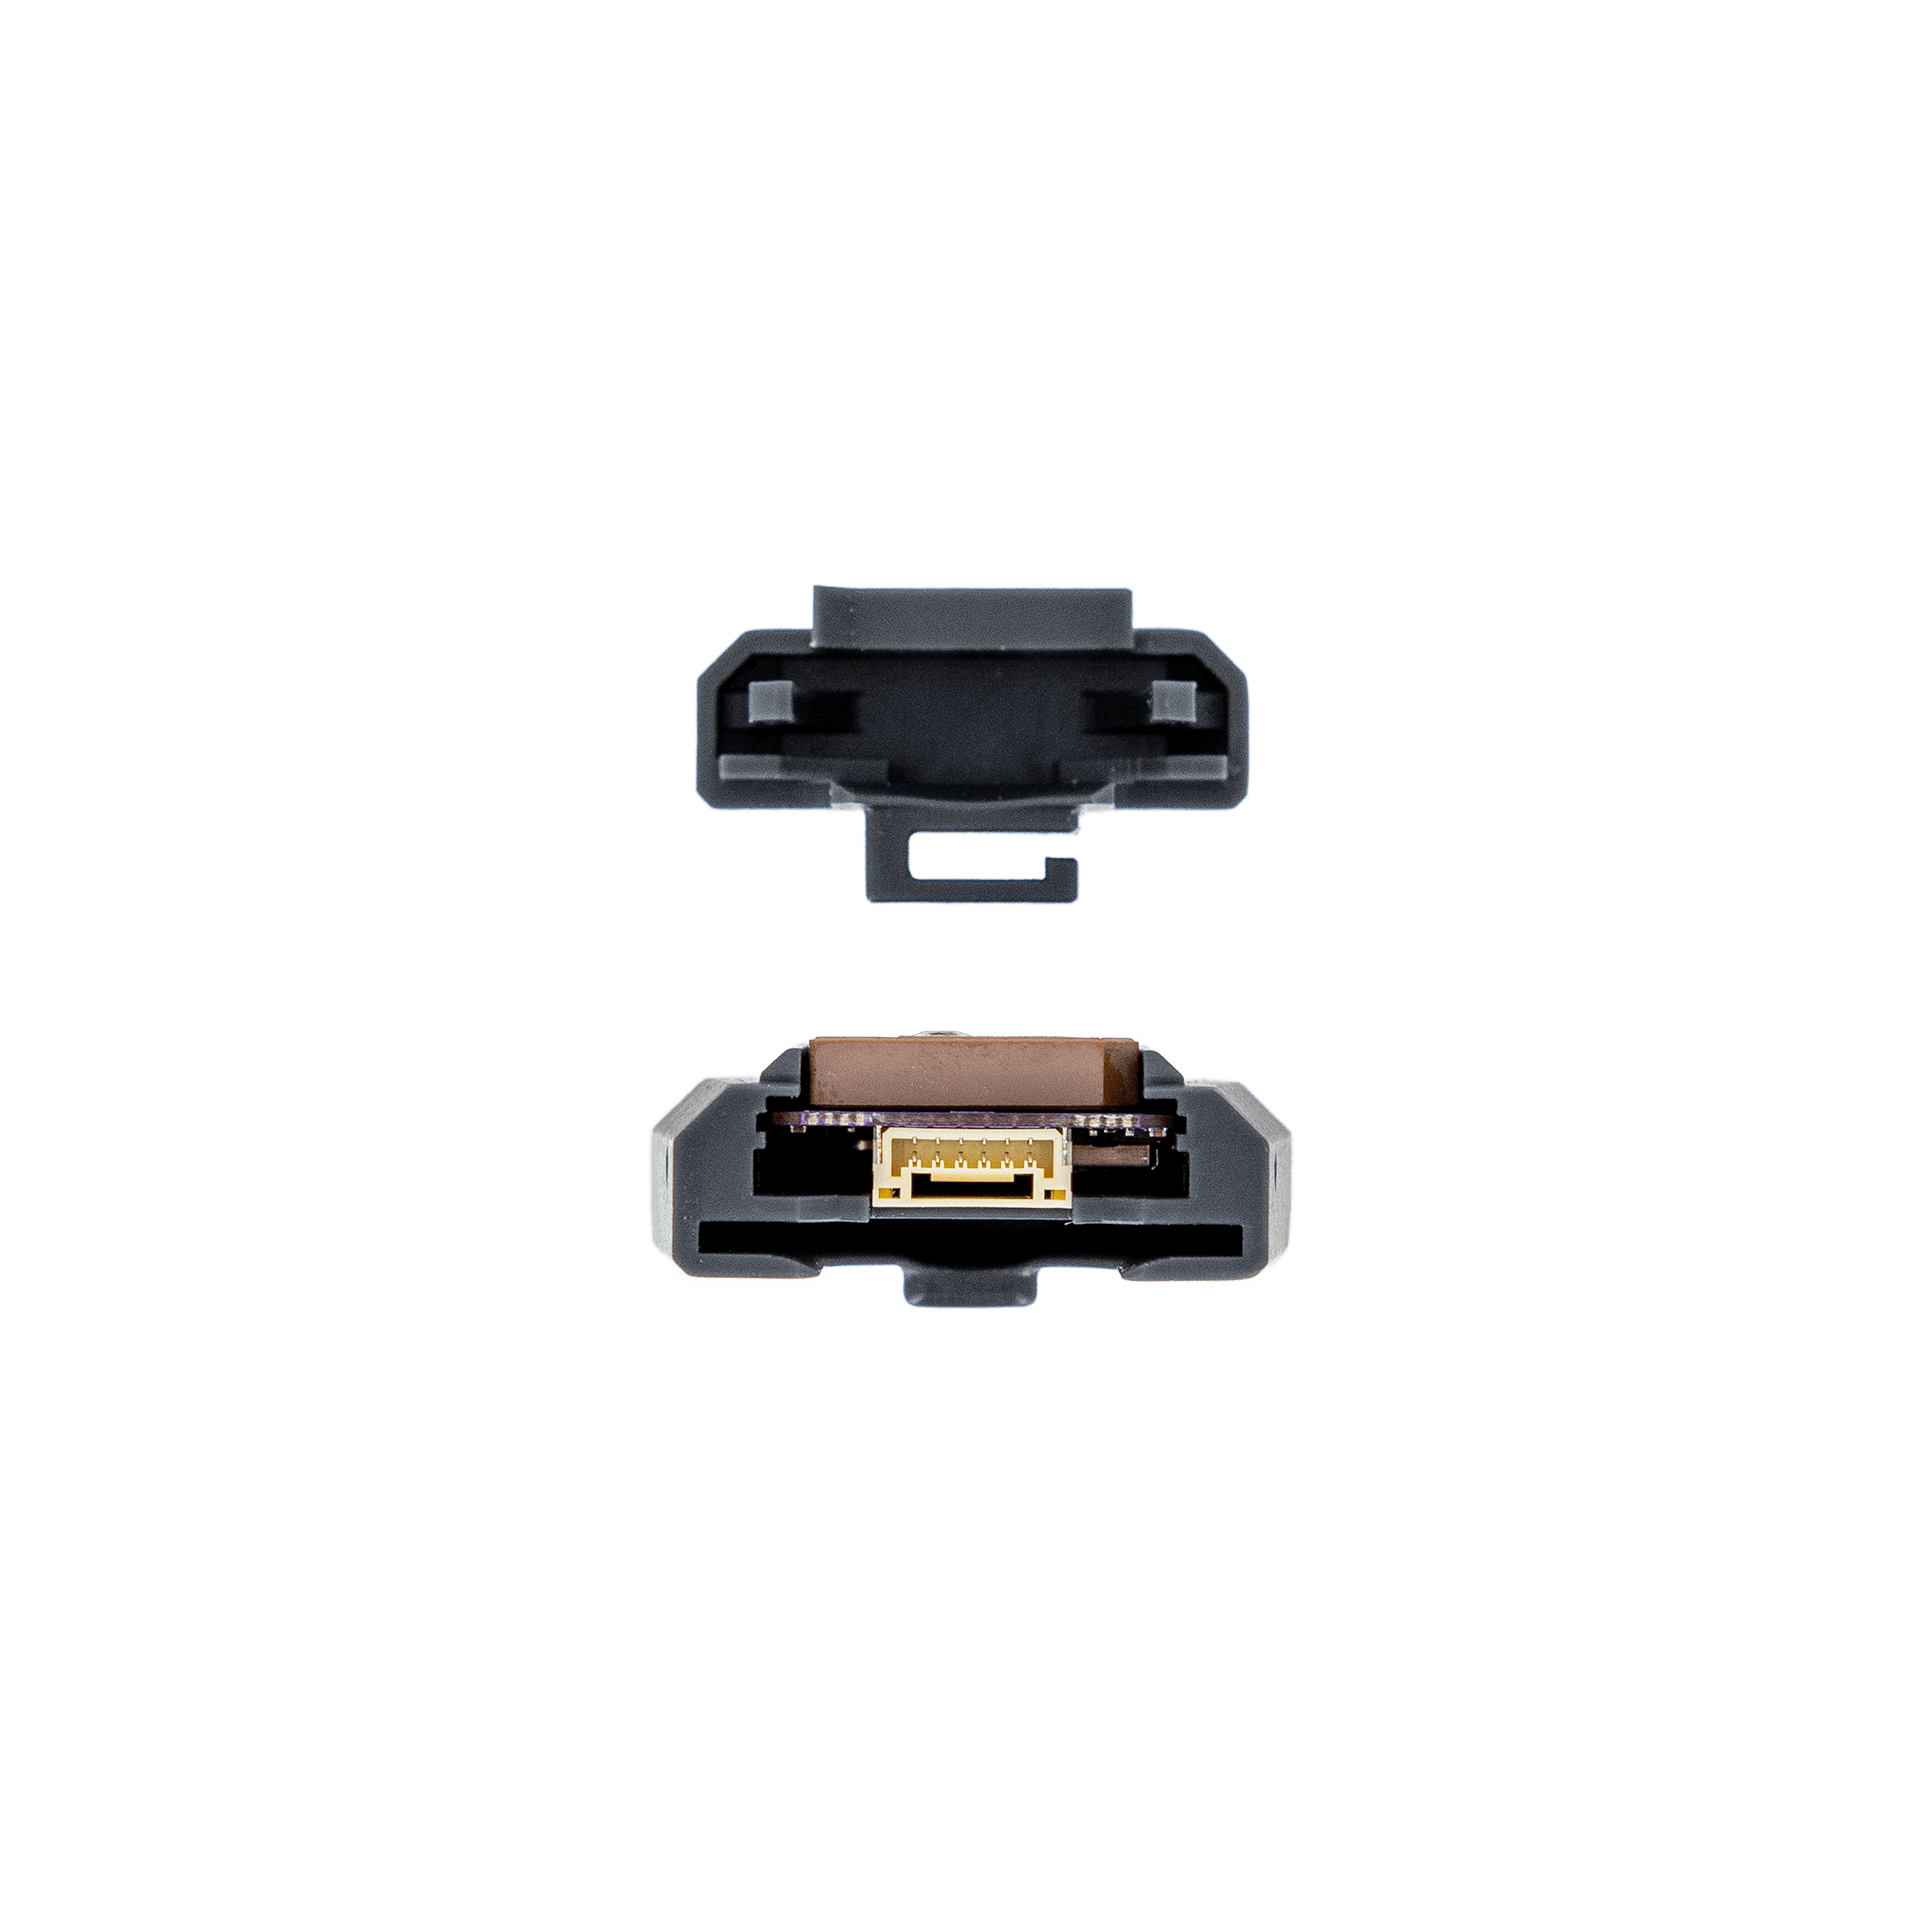 ModalAI, Inc. Accessory GPS uBlox M10 for Starling, Sentinel, m500 and Seeker